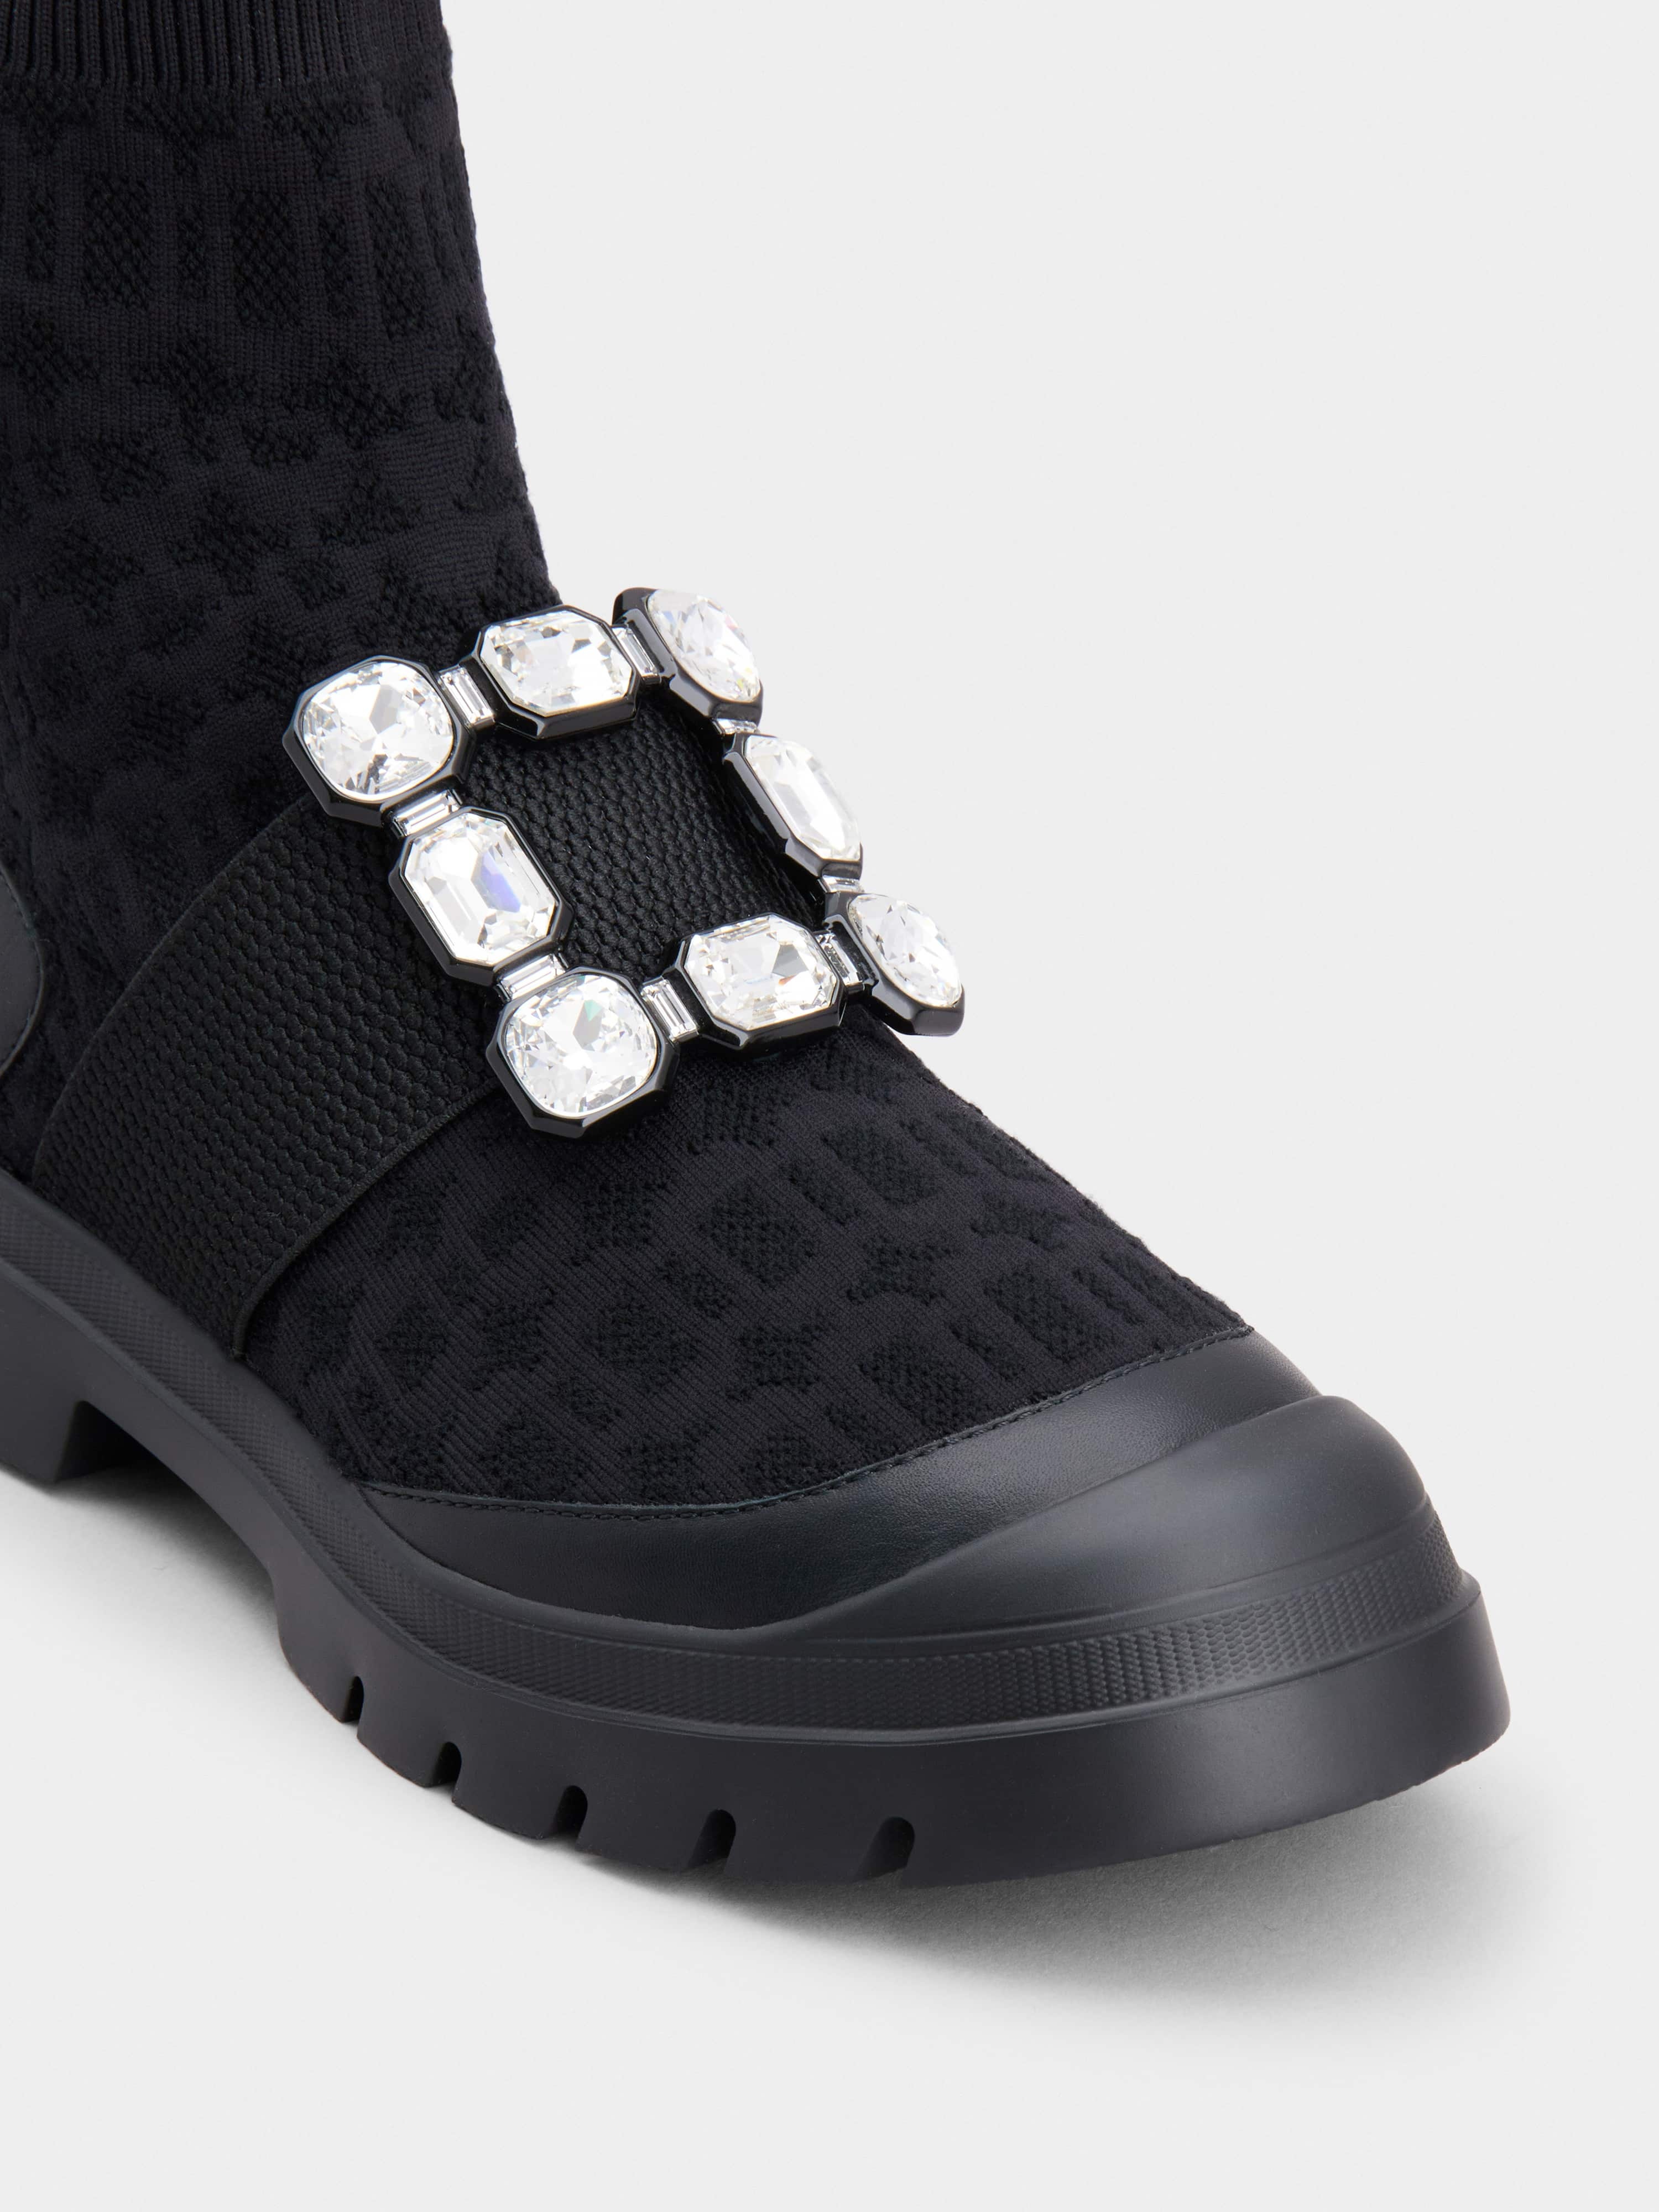 Walky Viv' Rhinestone Buckle Socks Ankle Boots in Fabric - 3